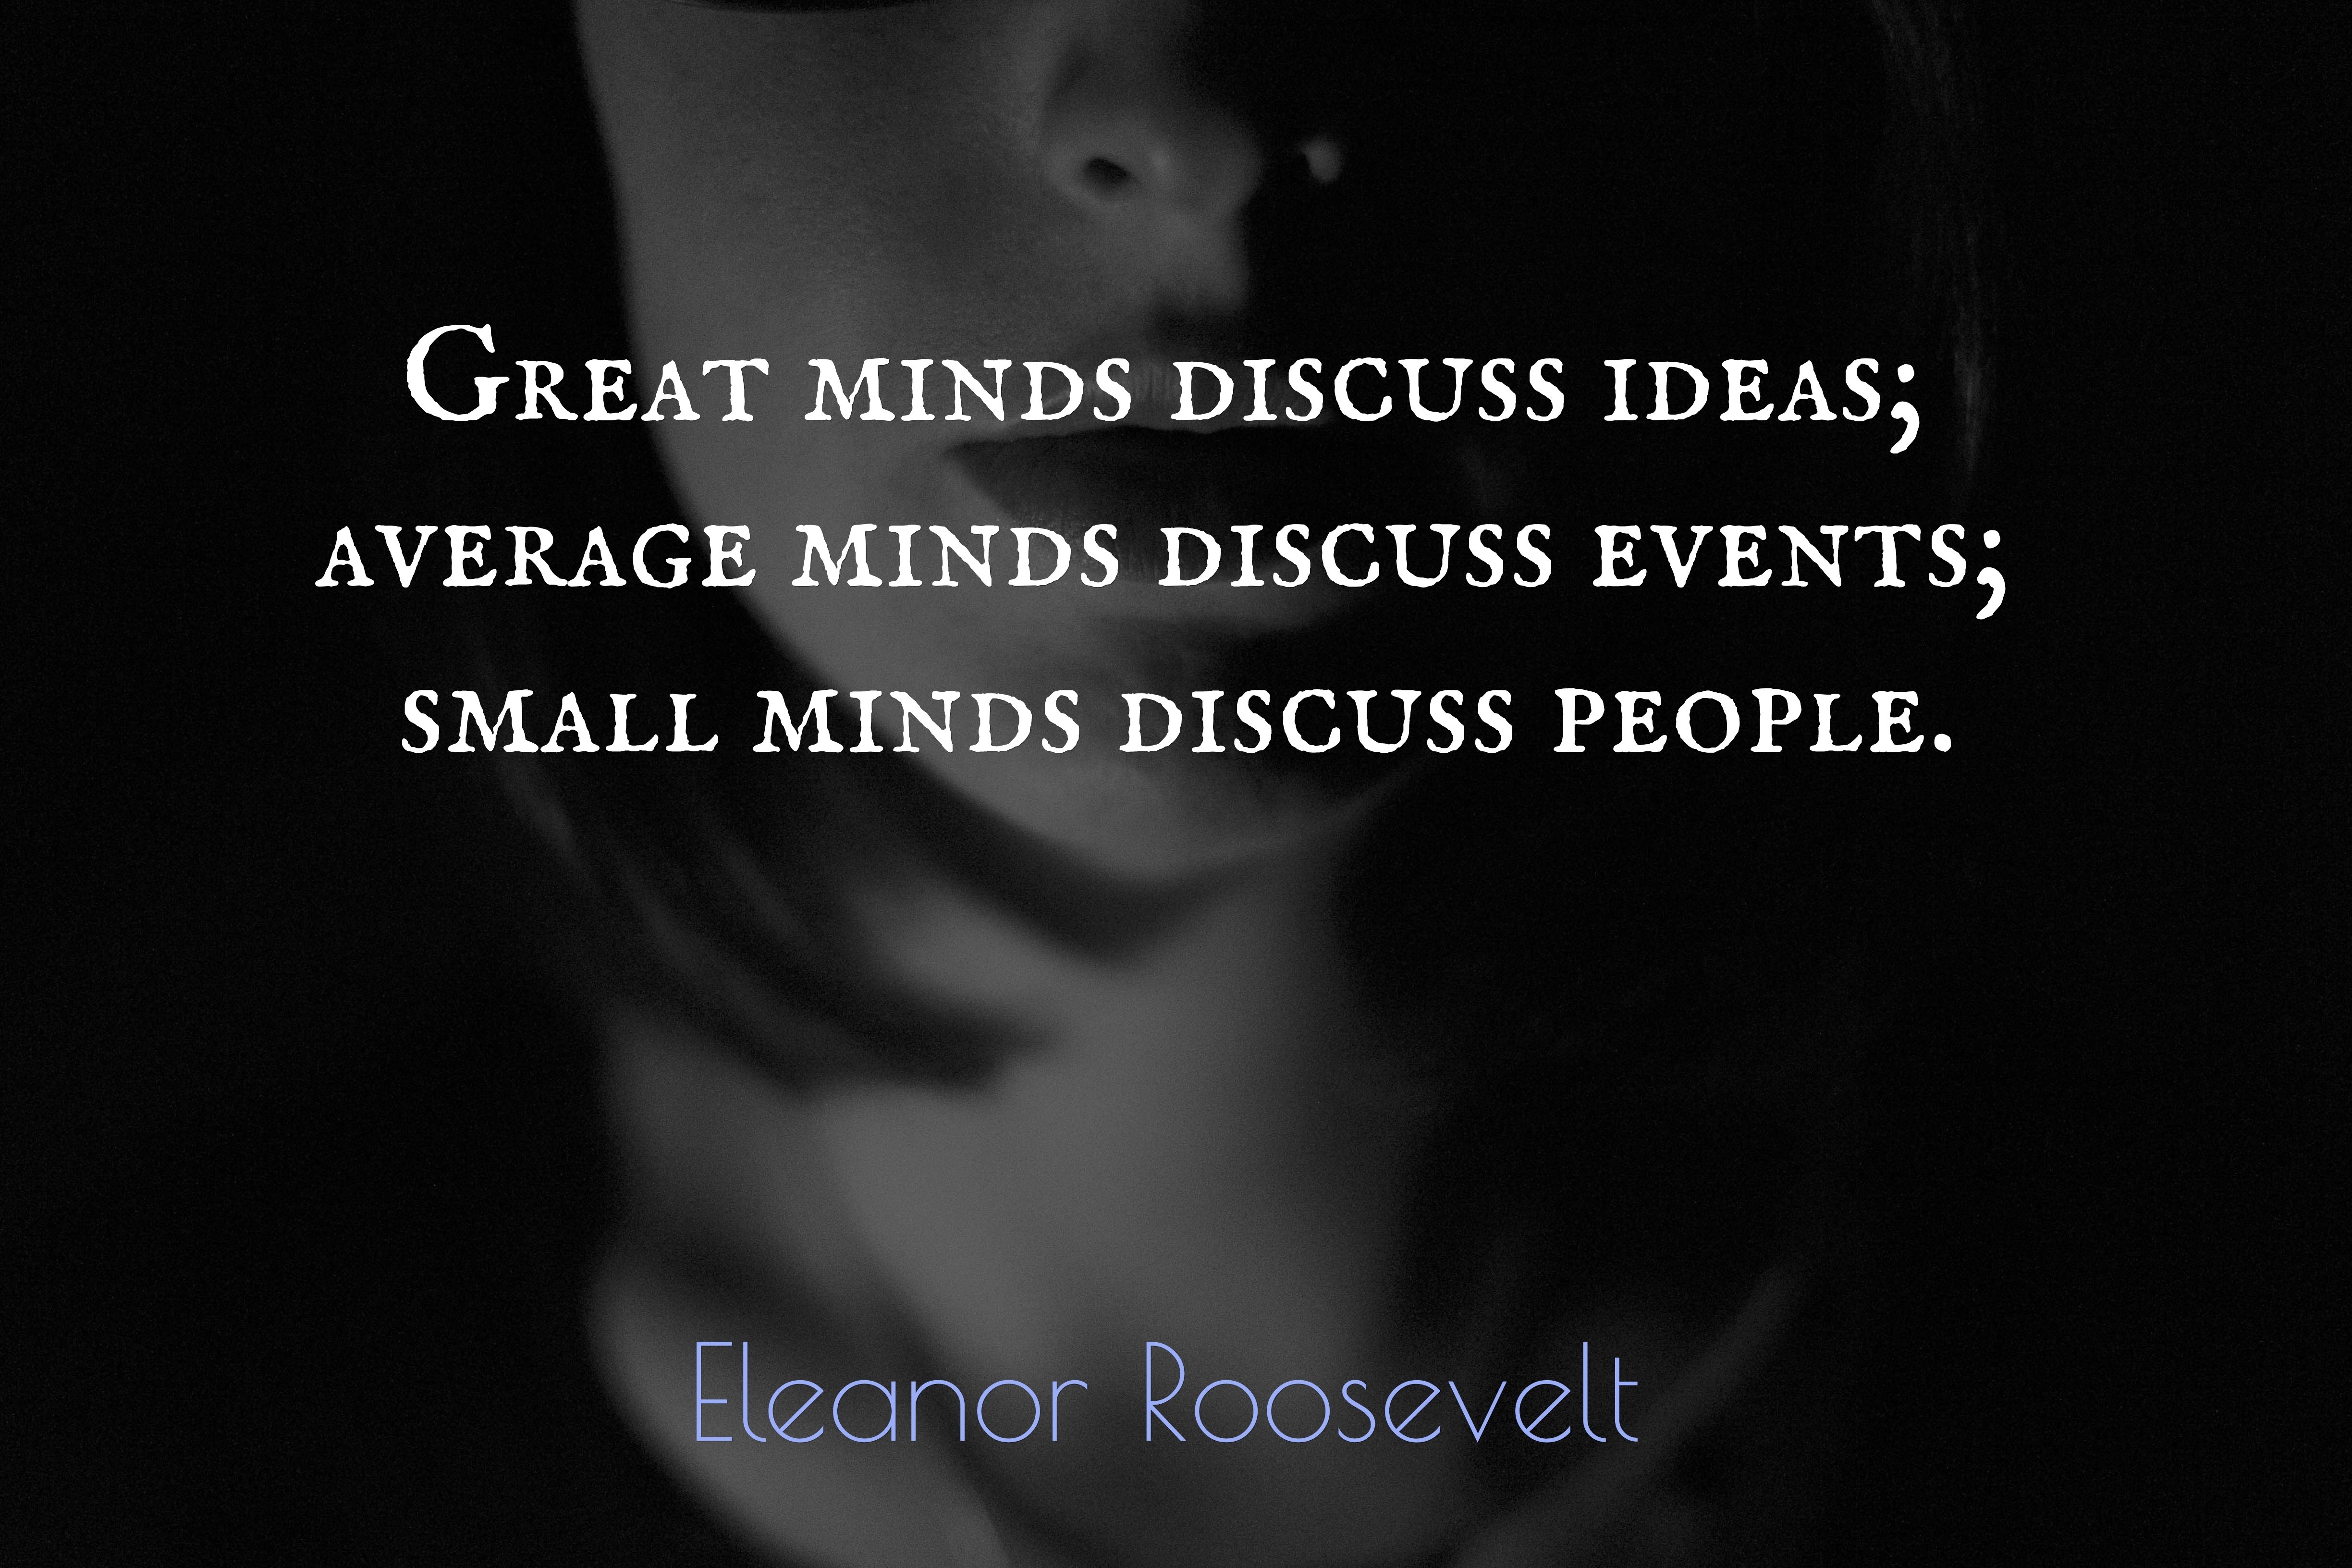 10 Pretty Great Minds Discuss Ideas Average Minds Discuss Events great minds discuss ideas average minds picture quotes 1165 1 2022